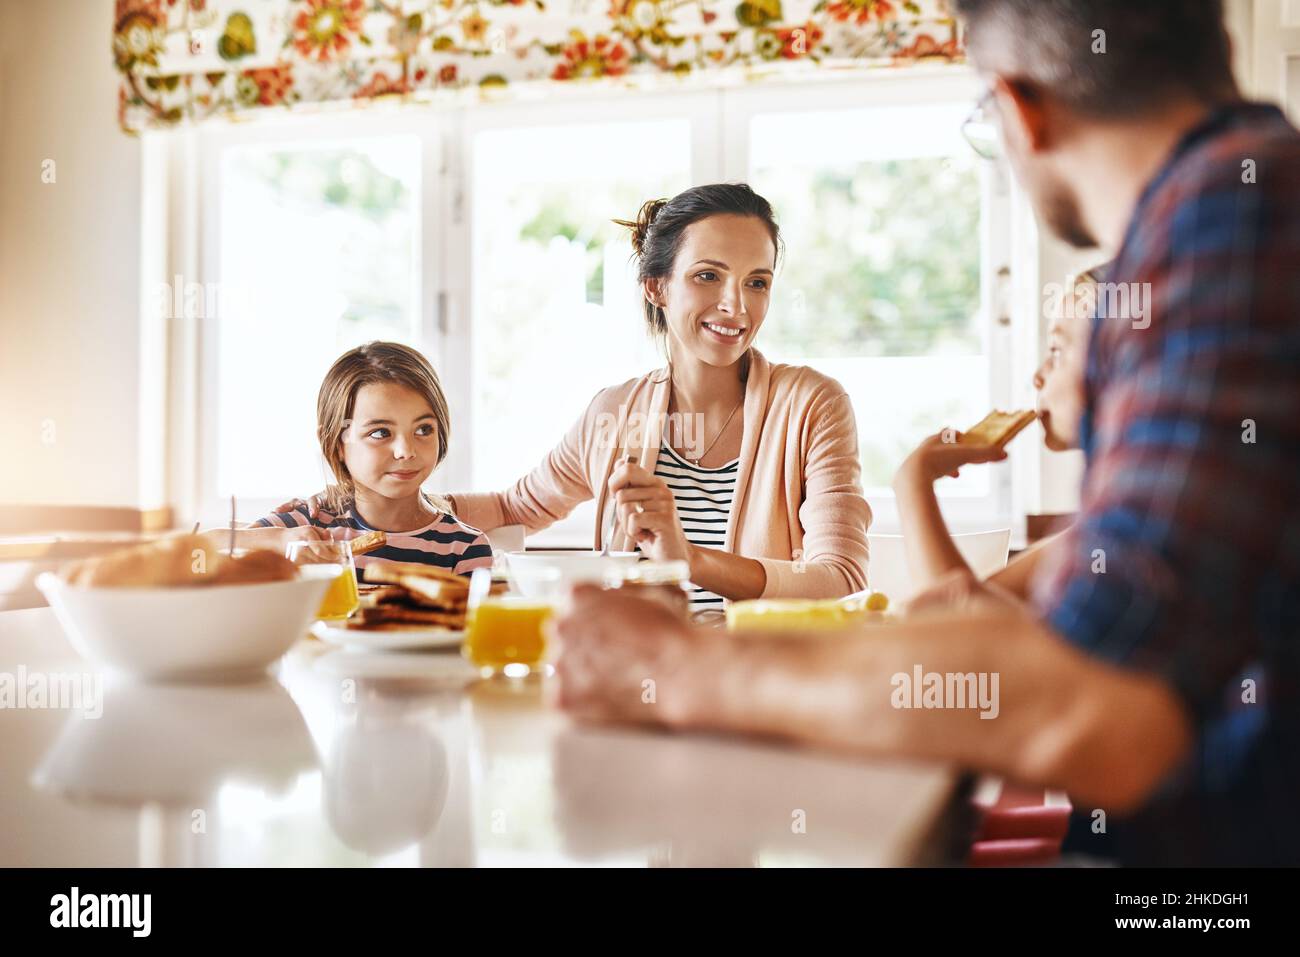 She makes sure that everyone has something to eat Stock Photo